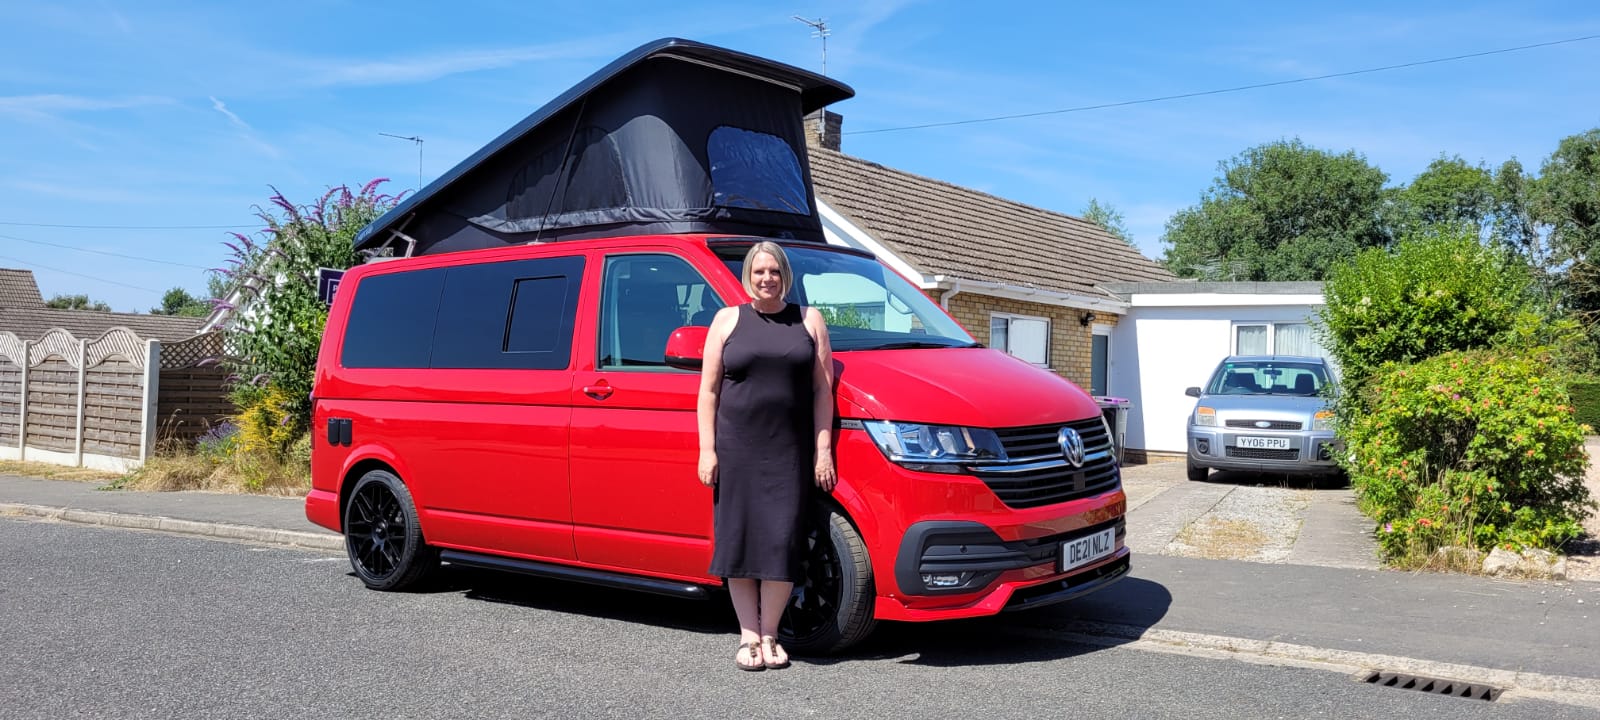 Winner Samantha Carlyon of a Pedro the 2021 VW Transporter T6.1 - EG Motors - Finished in Hot Hot Hot Chilli Red - 13th July